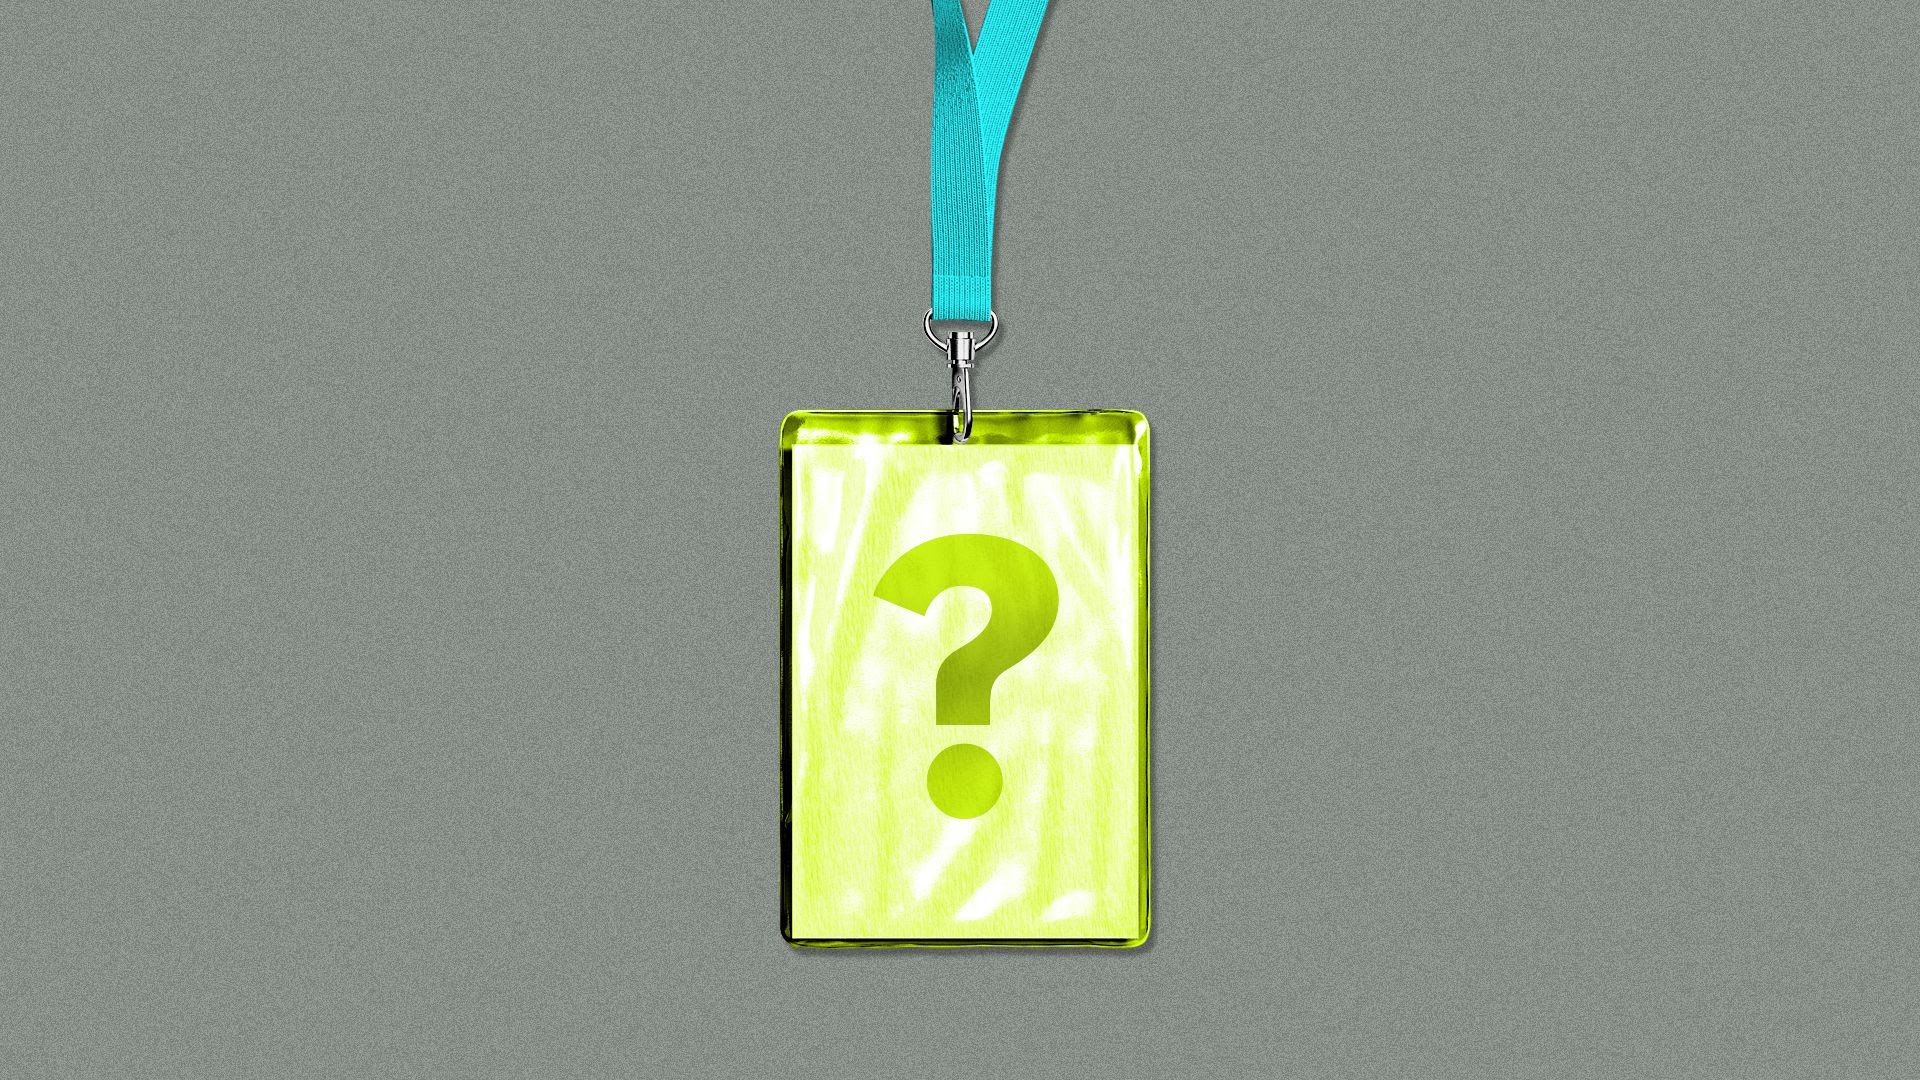 Lanyard with a yellow badge that has a question mark on it